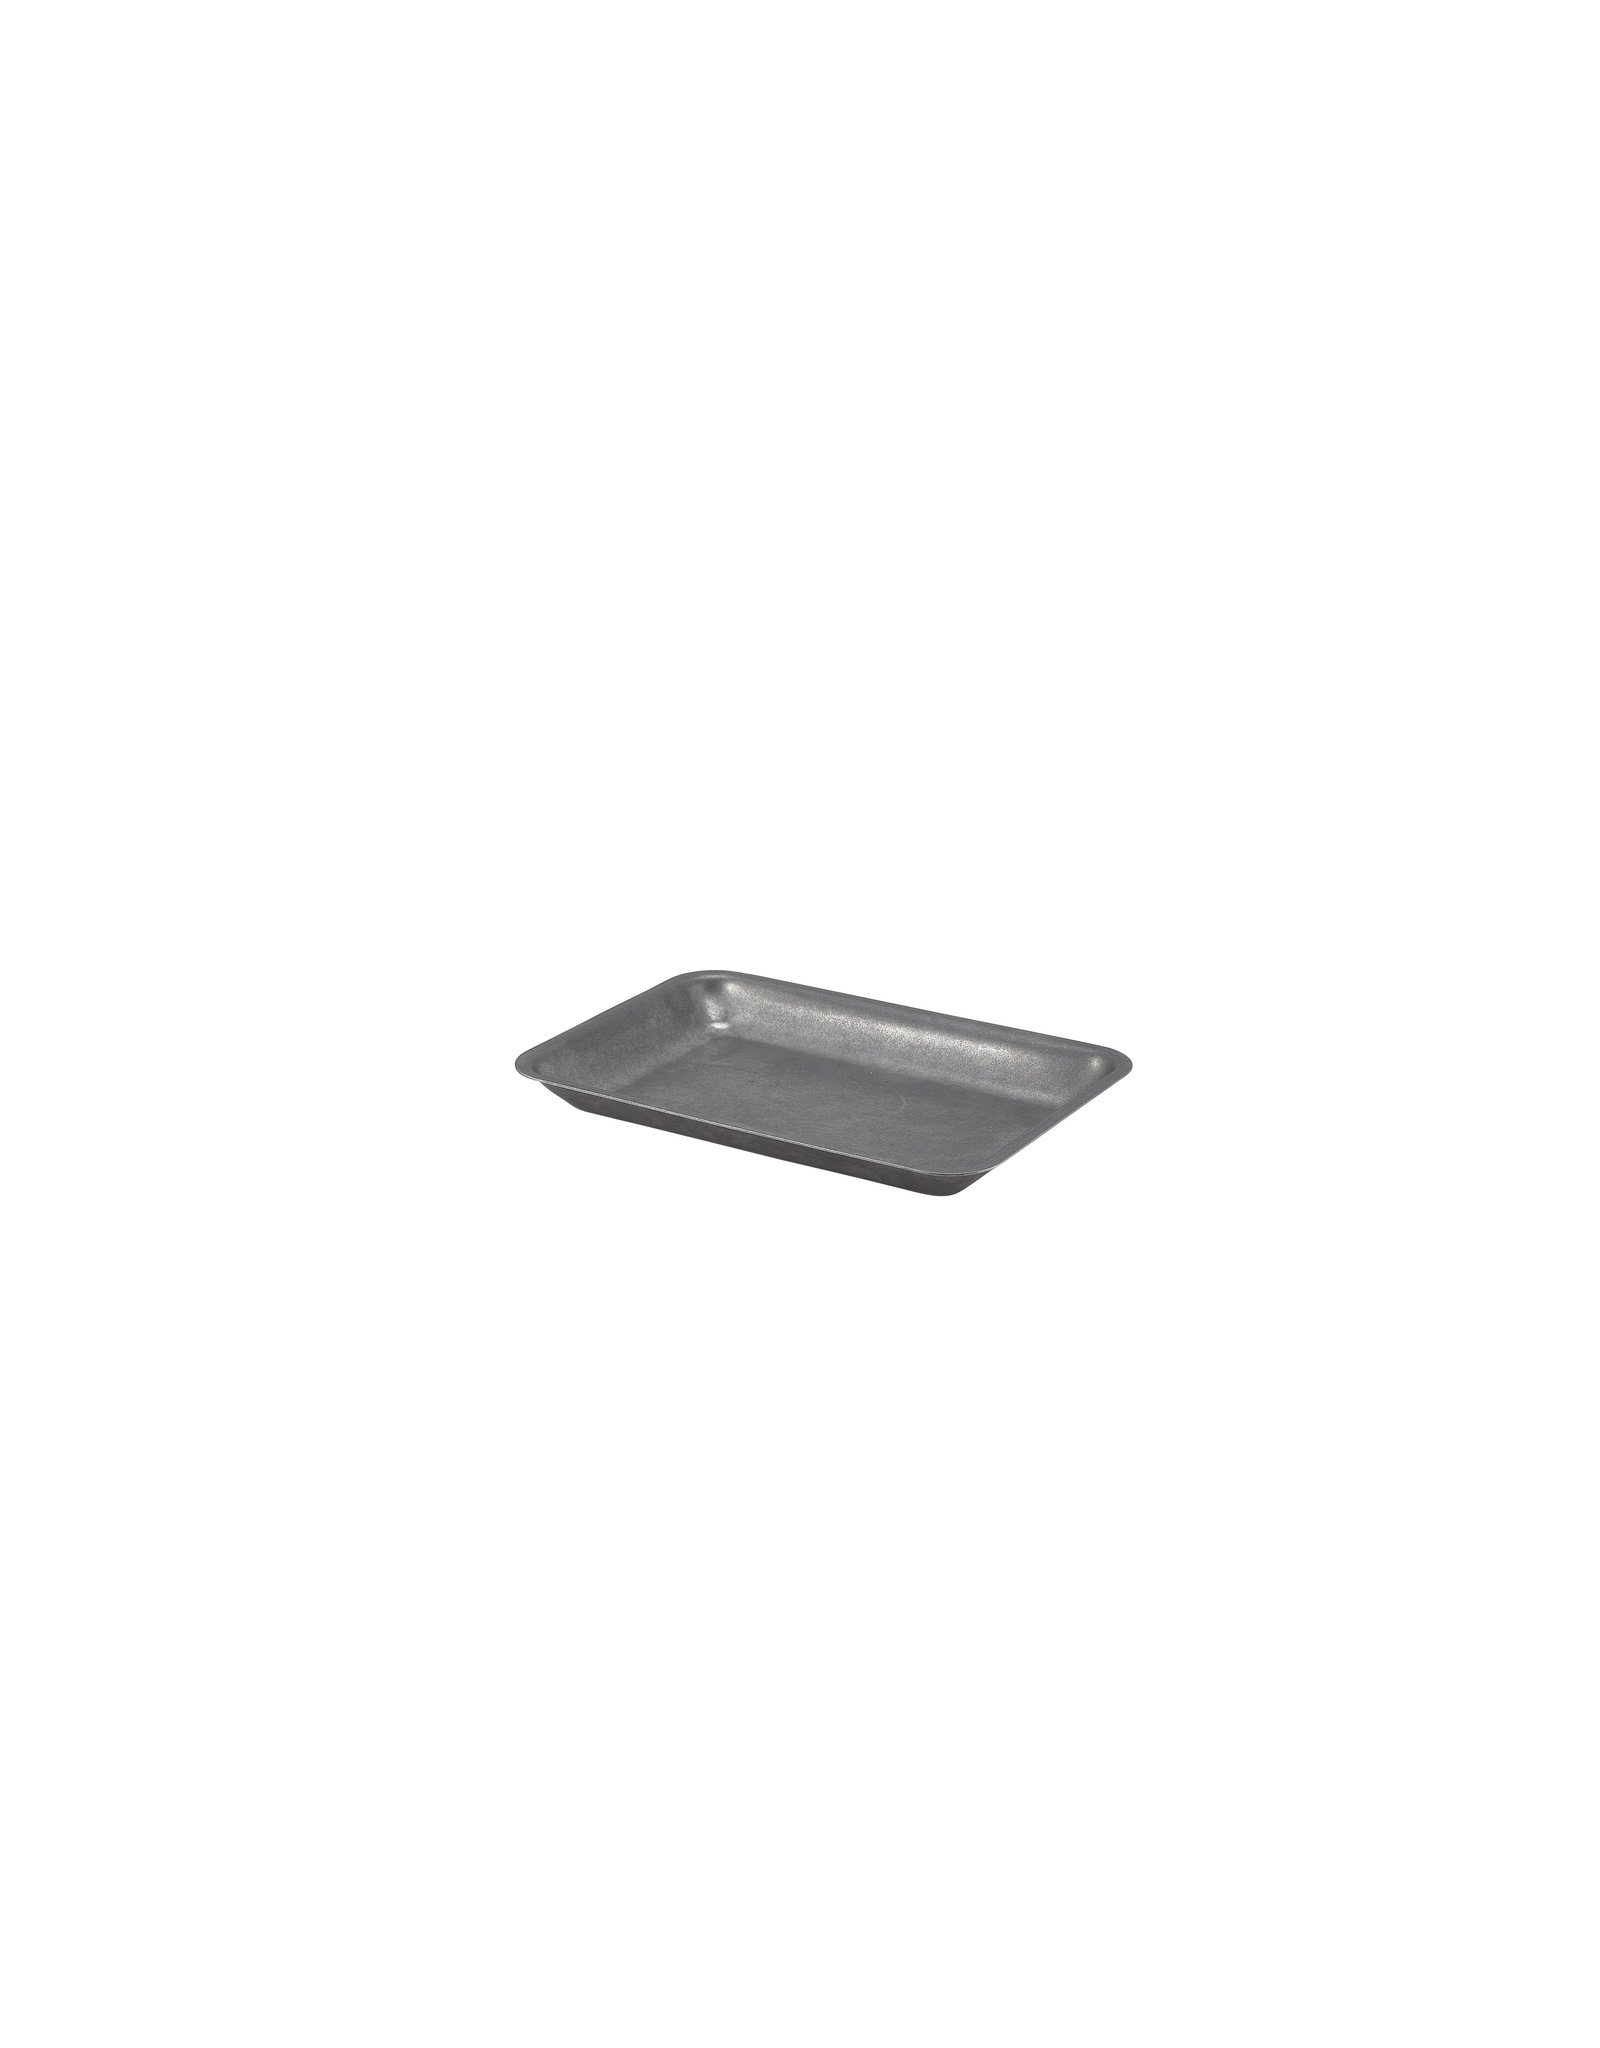 Stylepoint Vintage steel serving tray  20 x 14 x 2cm